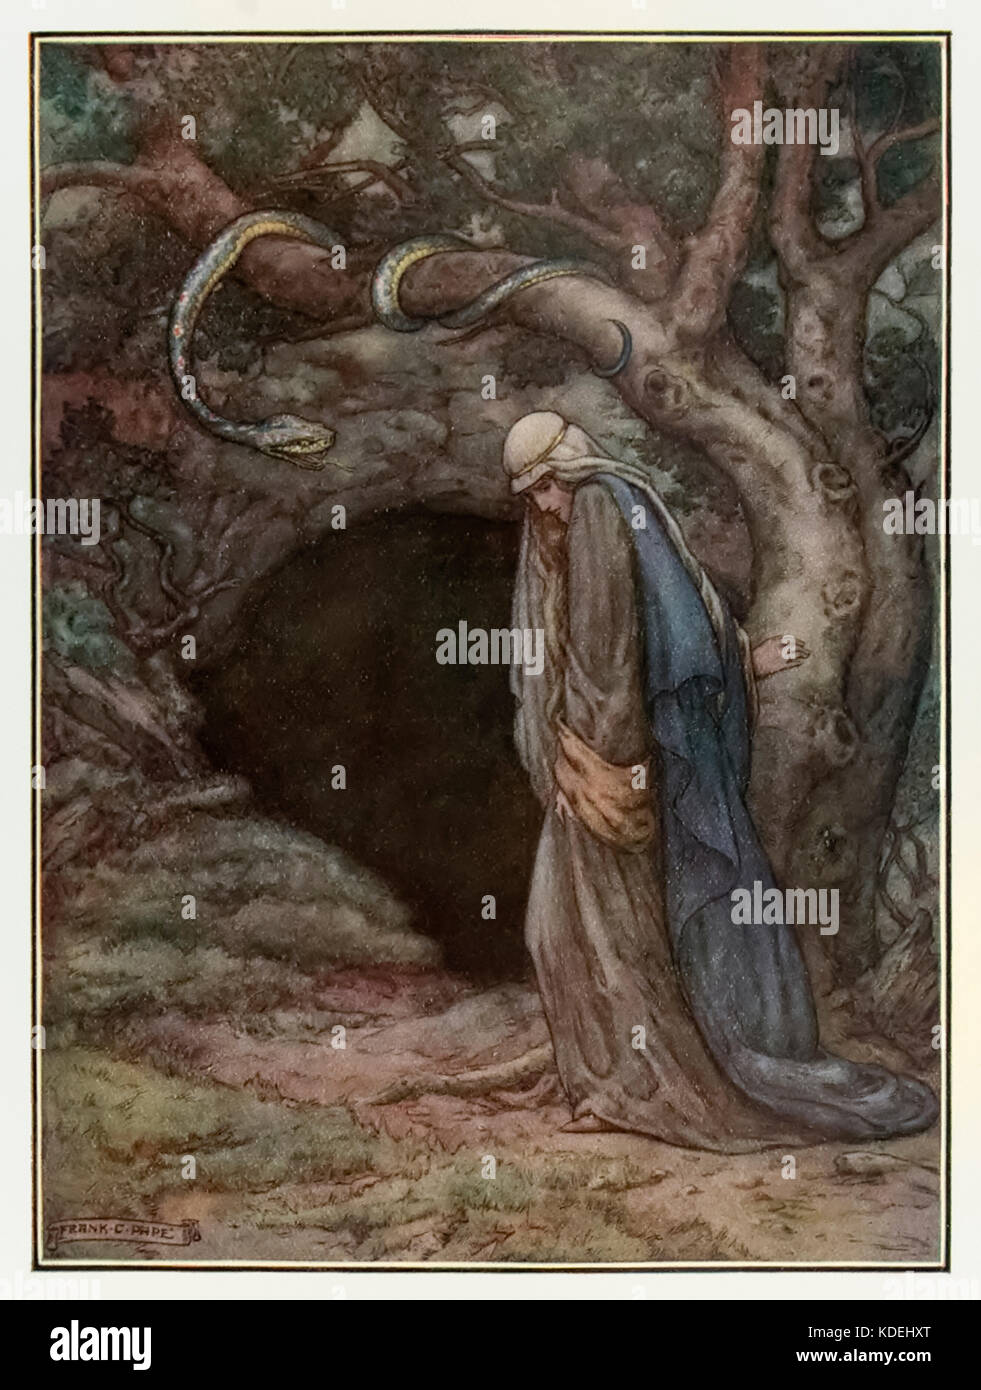 “Mercy at the Entrance of the By-way to Hell” from ‘The Pilgrim’s Progress’ by John Bunyan (1628-1688). Illustration by Frank C. Papé (1878-1972). See more information below. Stock Photo